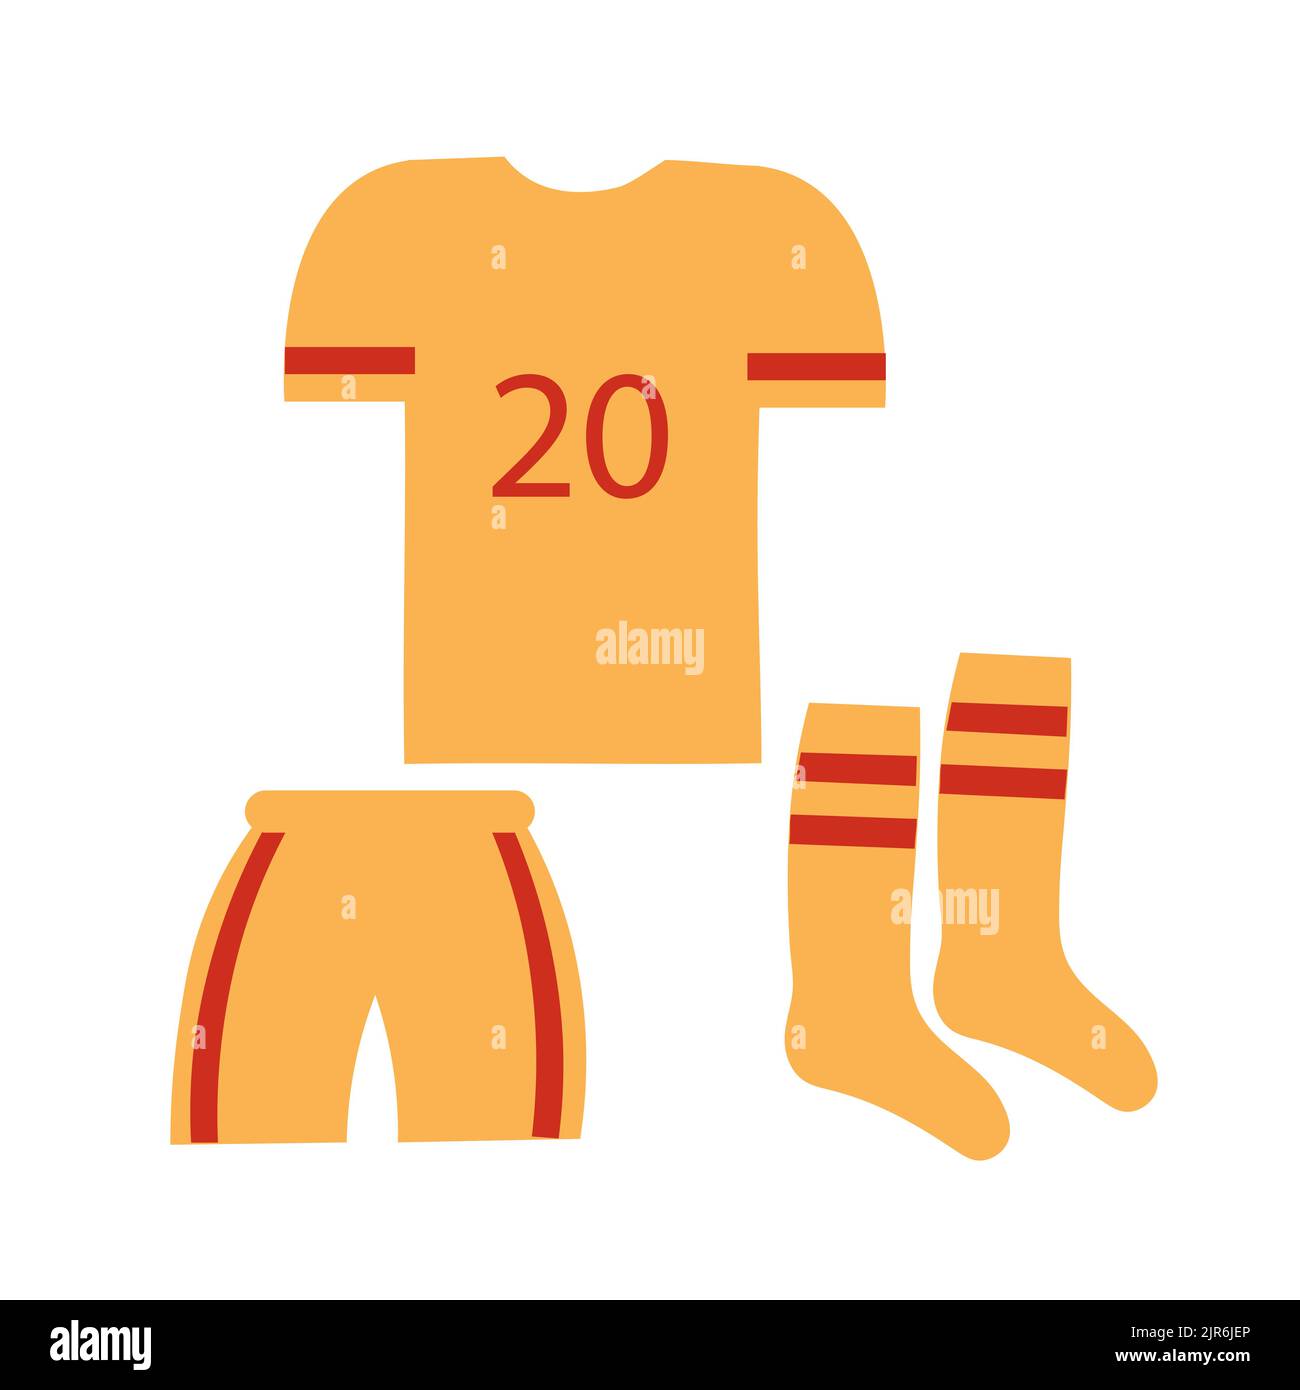 Football player clothing. T-shirt, balls and knee-highs are attributes of the clothes of the game of football. Design element. Stock Vector